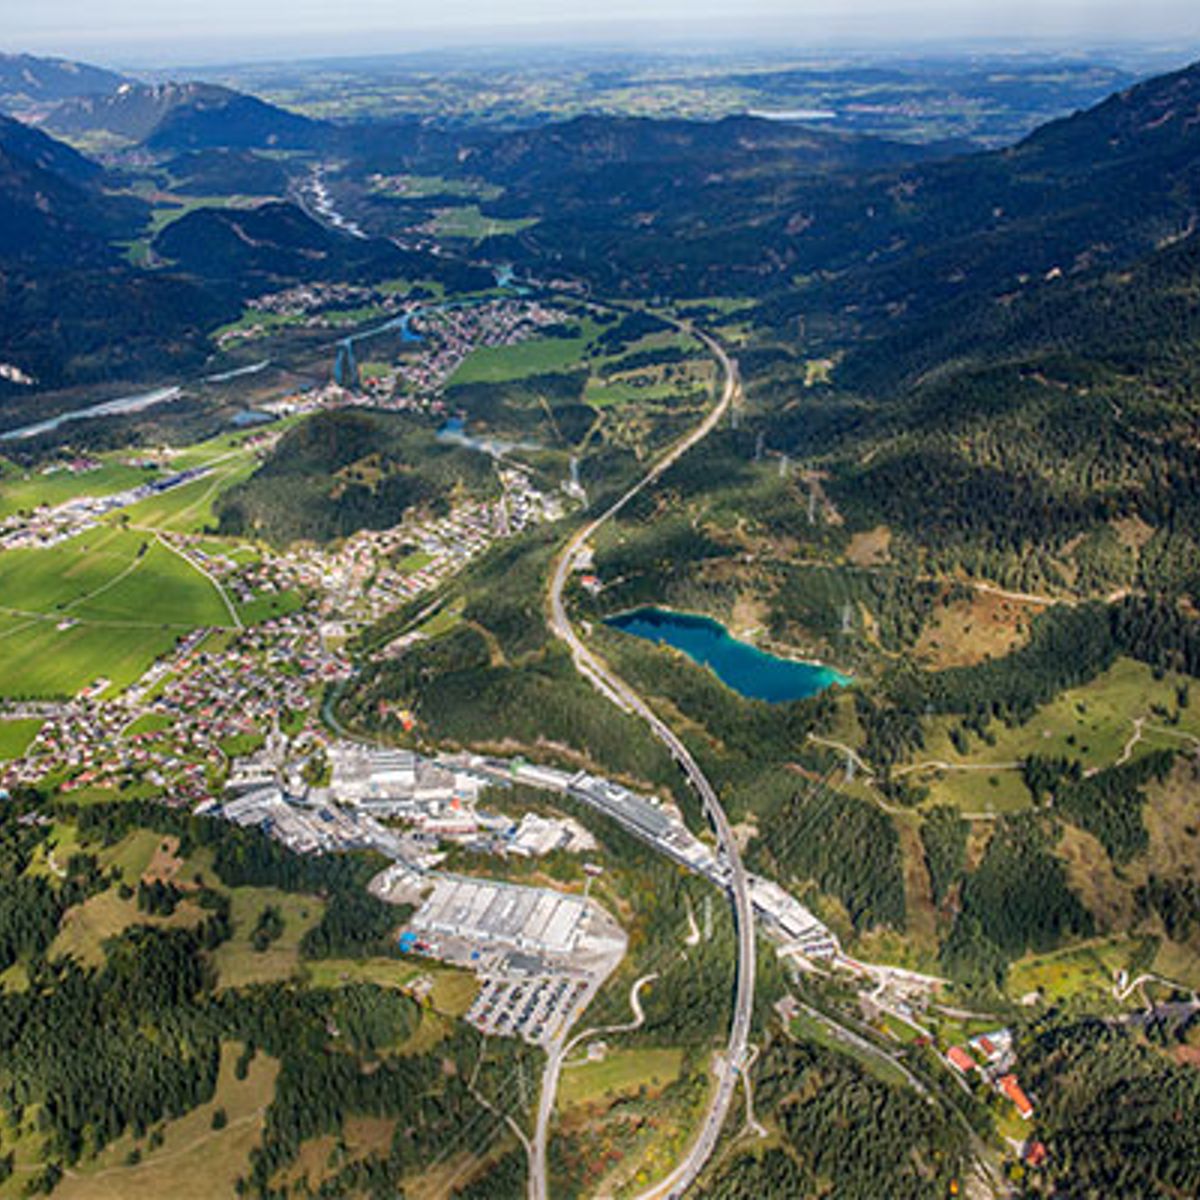 Aerial photo of Reutte